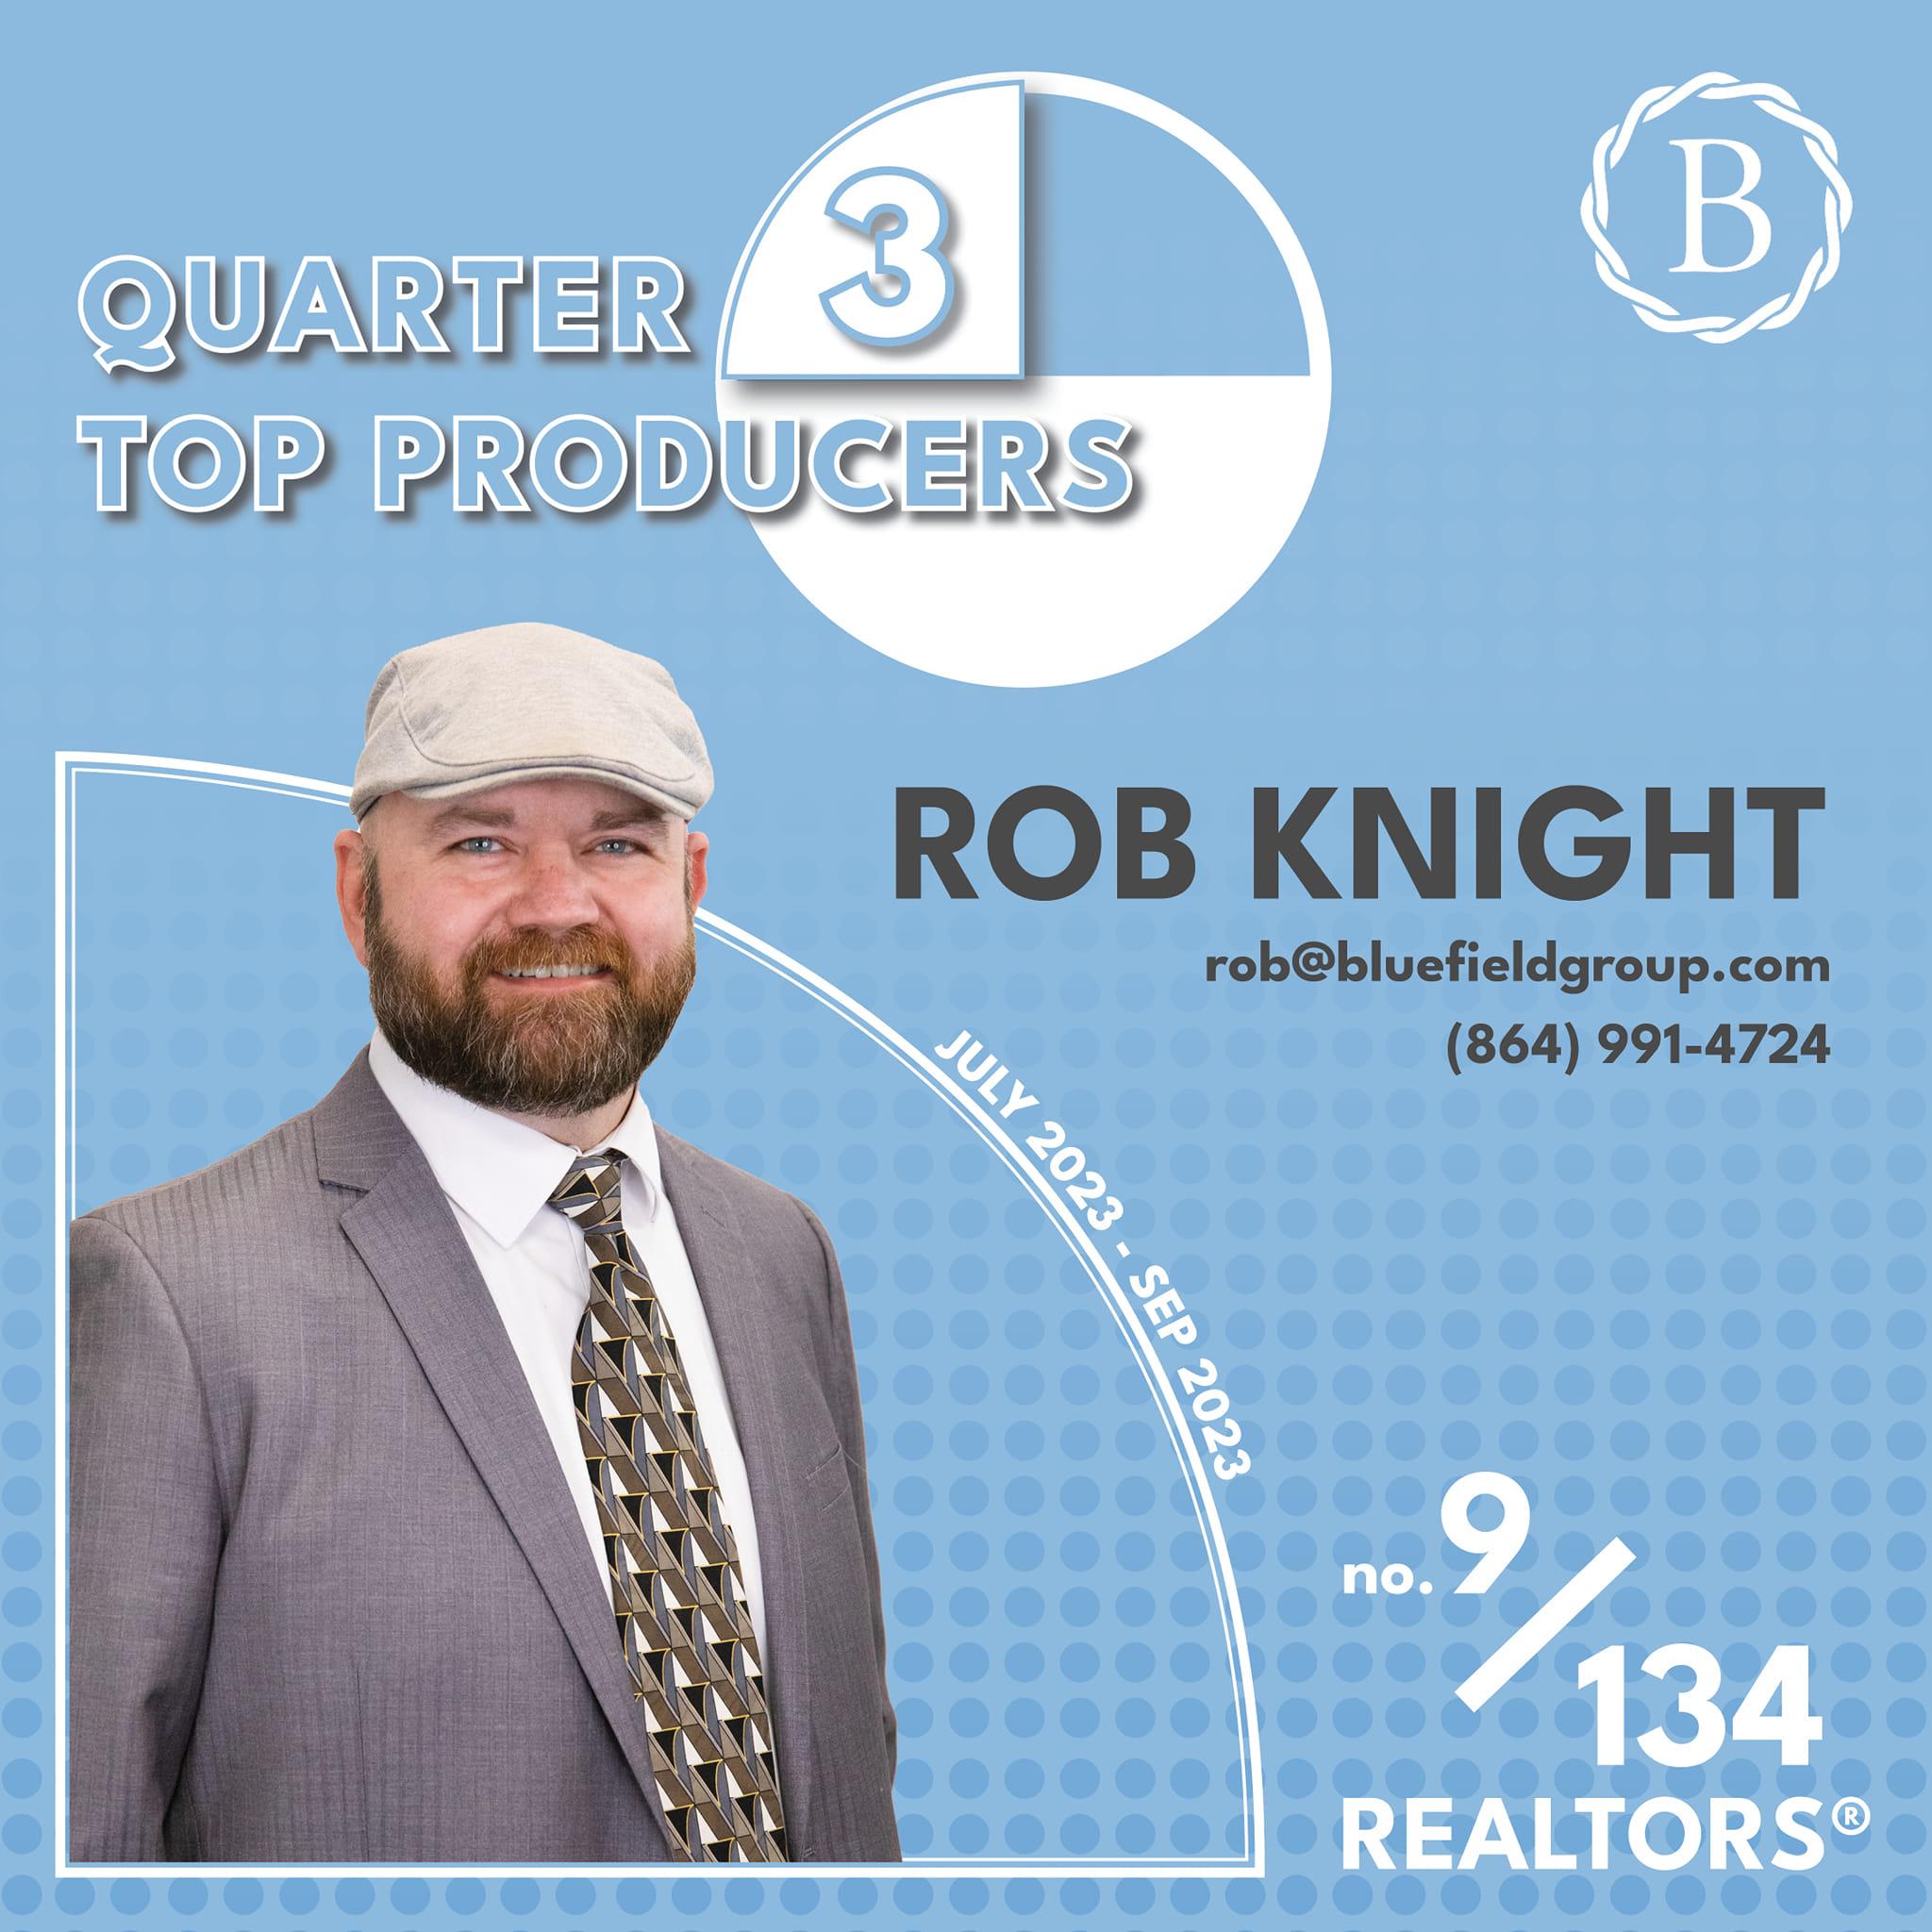 Knight Property and Auction With Bluefield Realty Group - Inman, SC - (864)991-4724 | ShowMeLocal.com